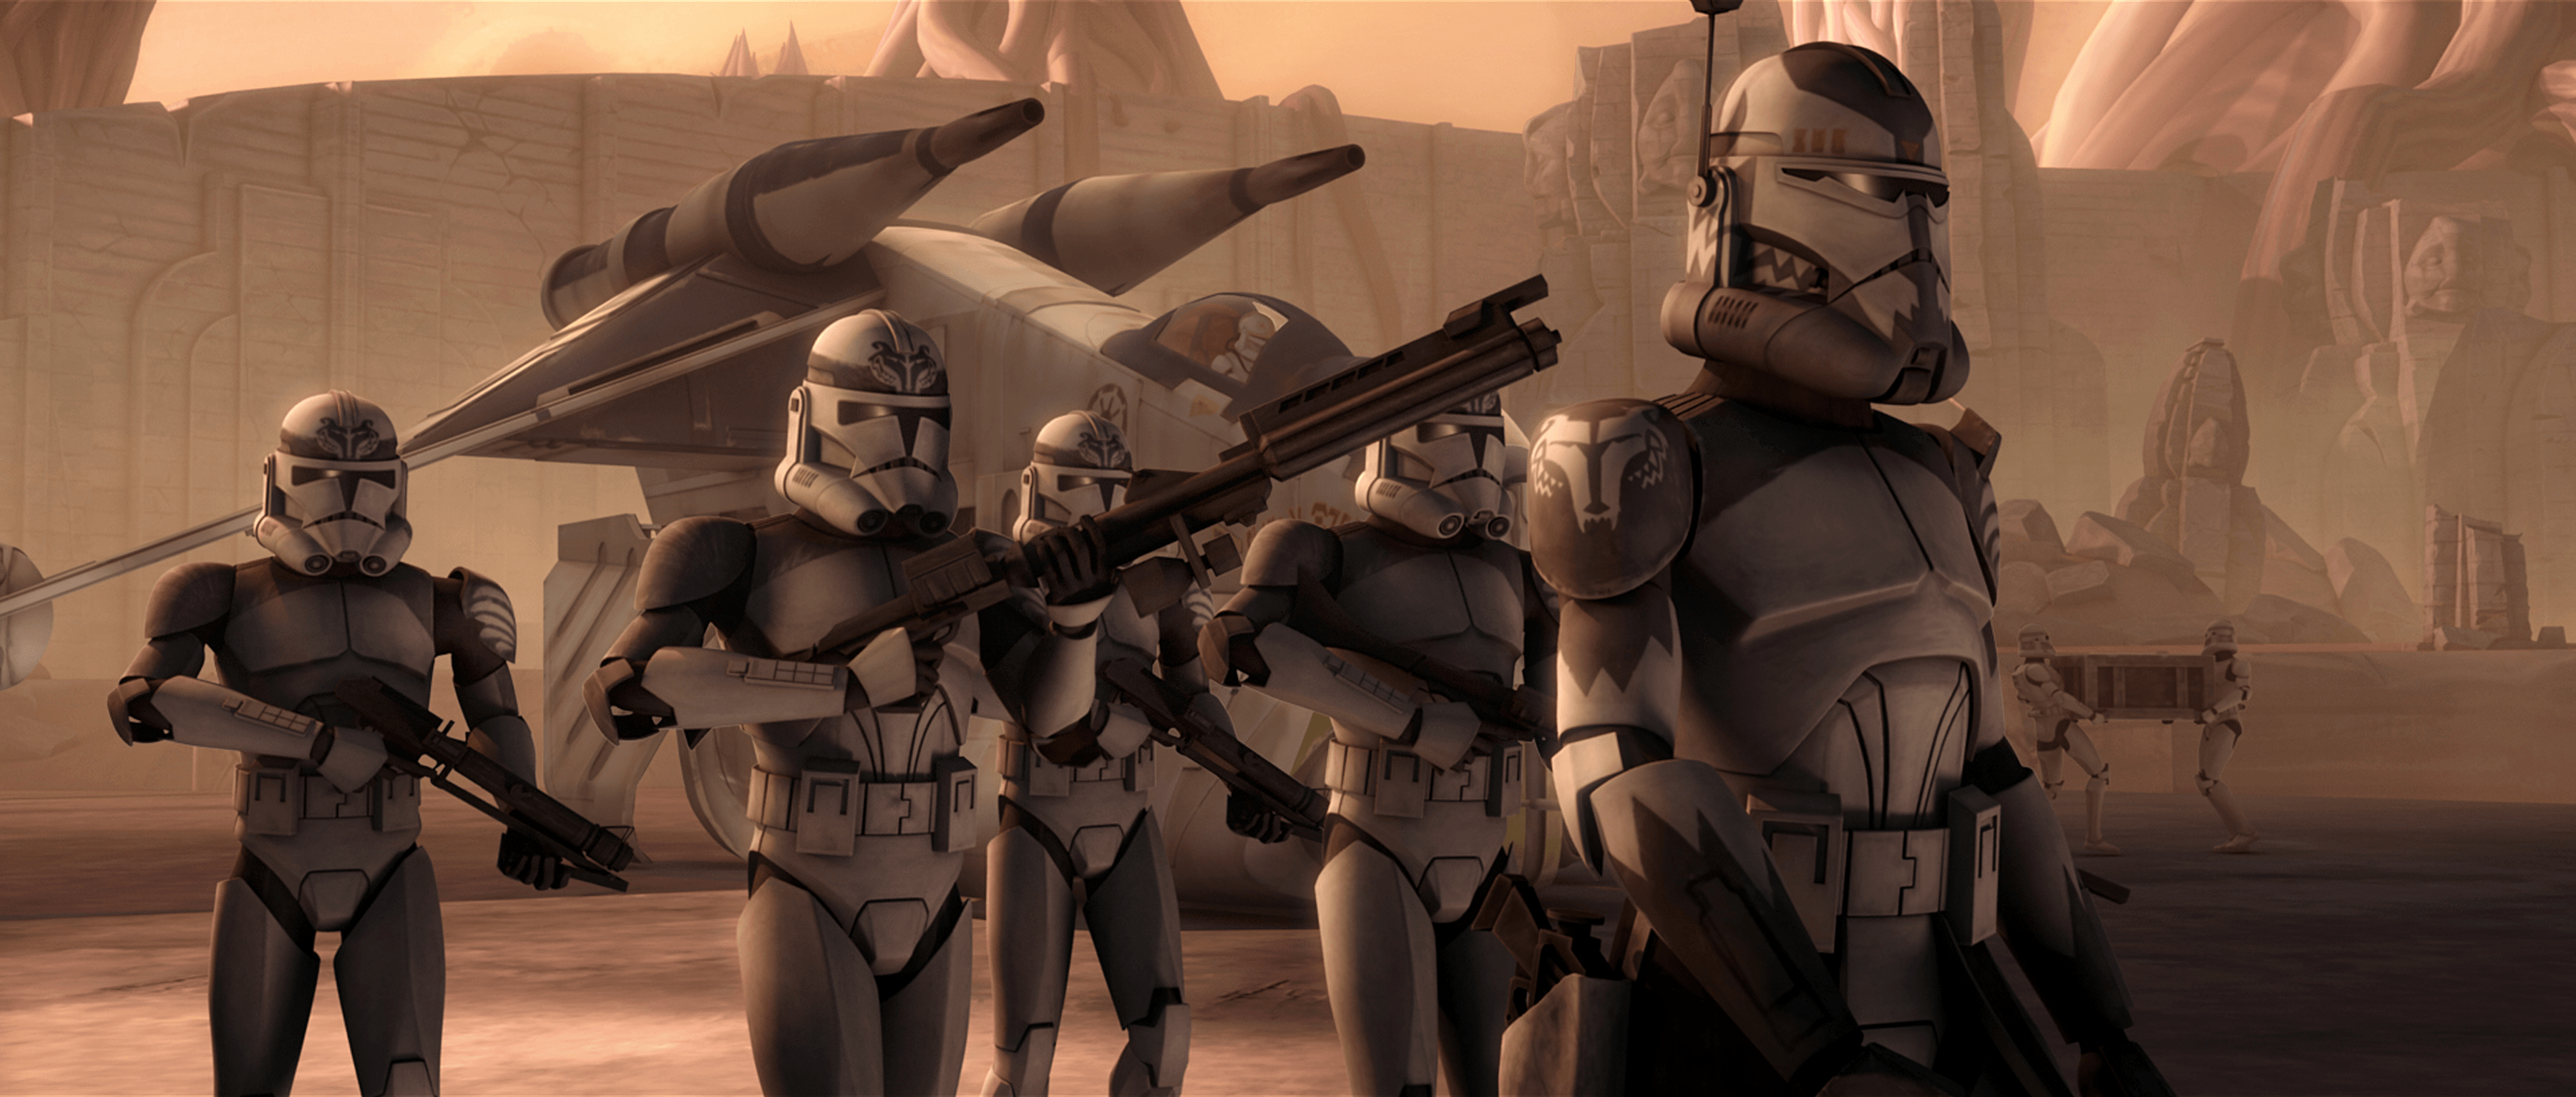 Clone Commander Wolffe Wallpapers - Wallpaper Cave